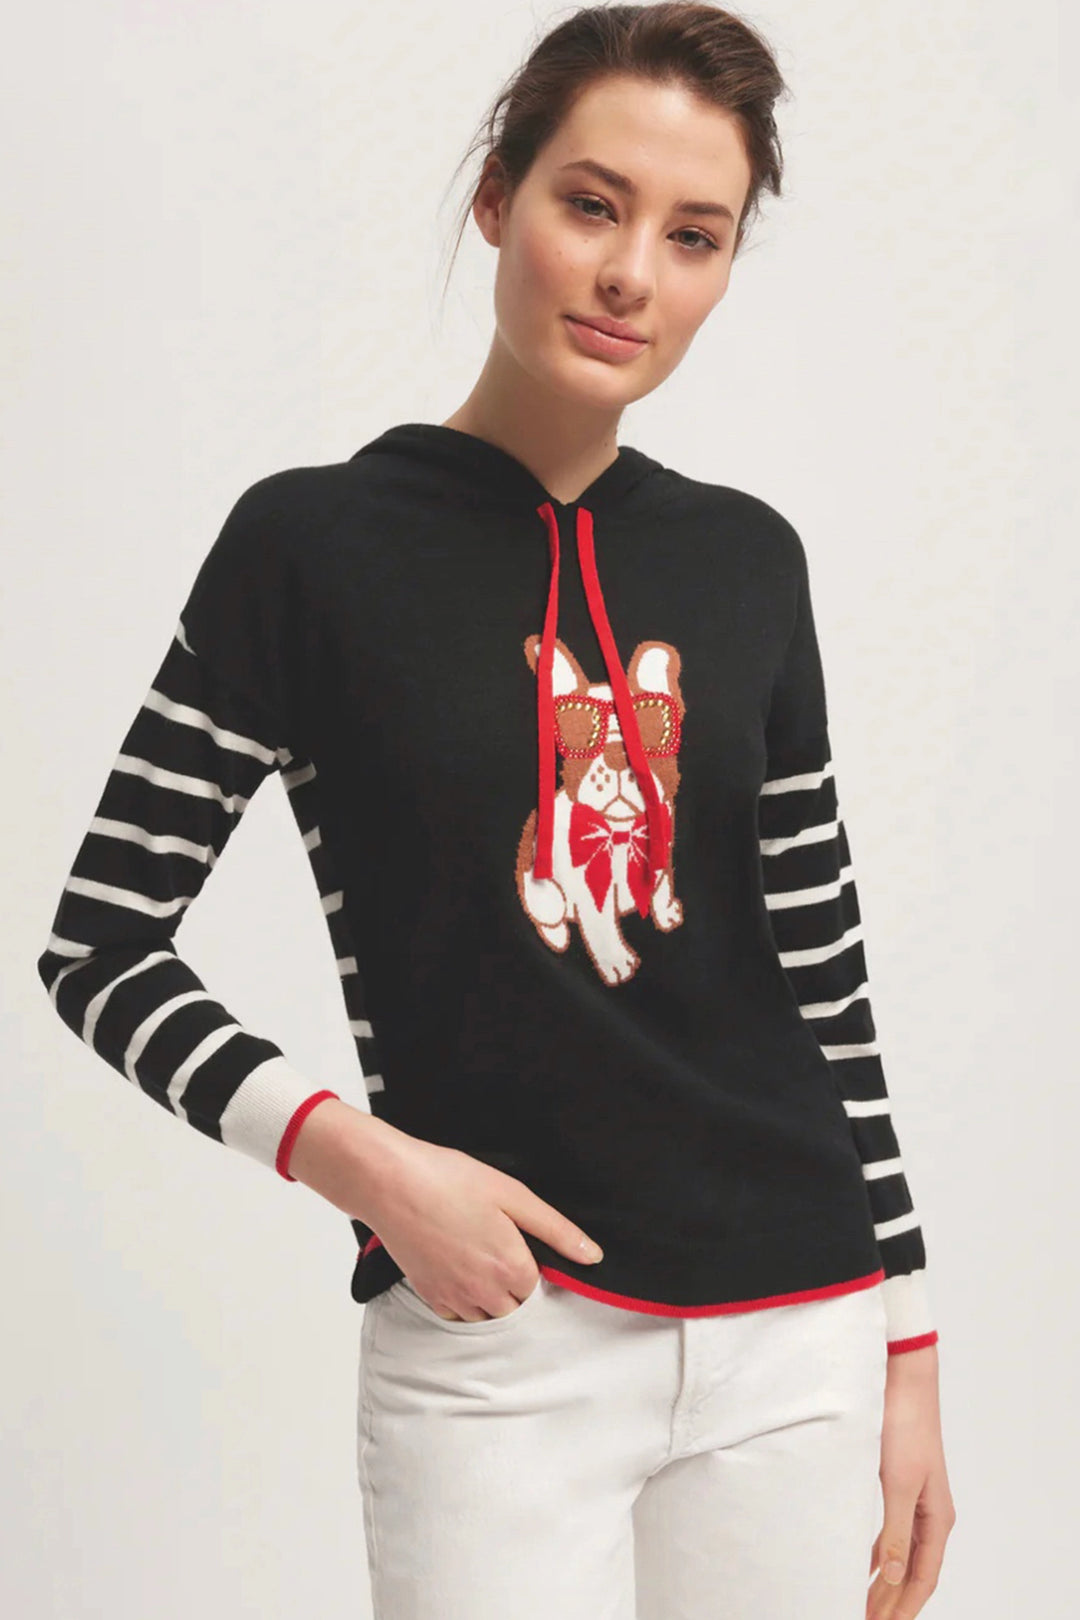 This fab look features a cool dog print with glasses and bow tie plus a drawstring hoodie and those oh so stylish white stripes along the sleeves. 